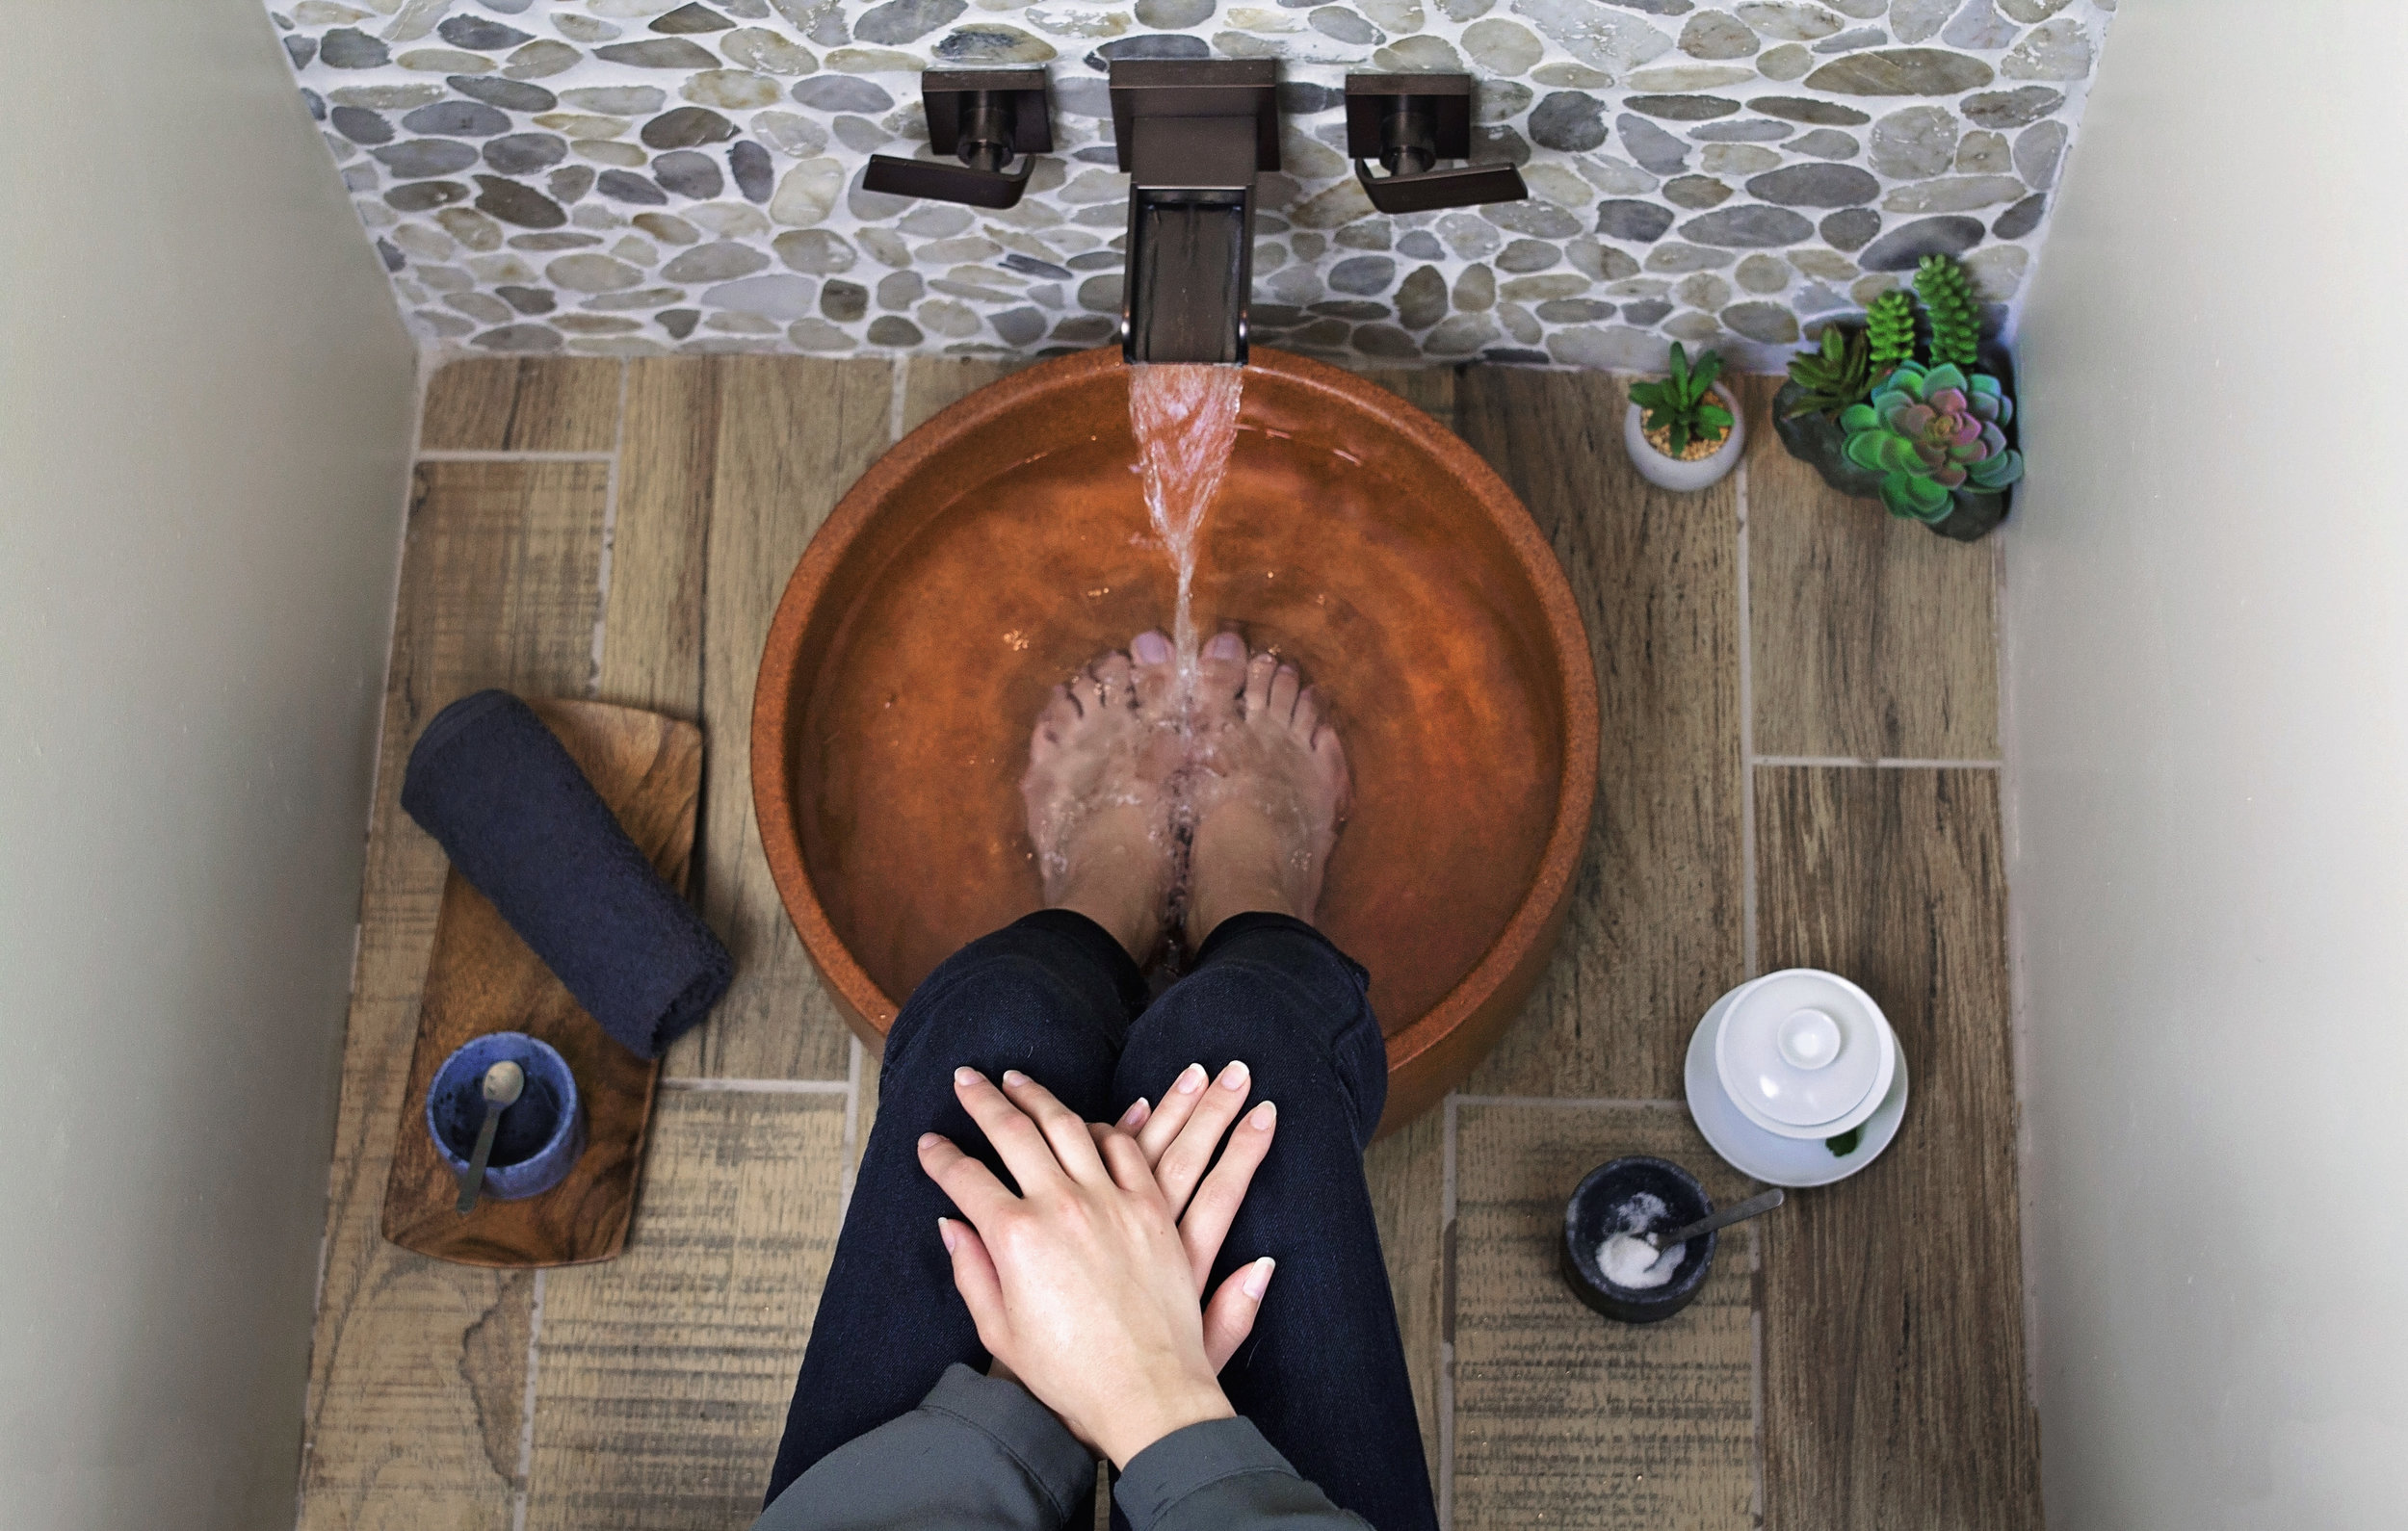 Woman crosses her hands over her lap while she waits for the water to fill in her aromatic foot bath at Jalan Facial Spa